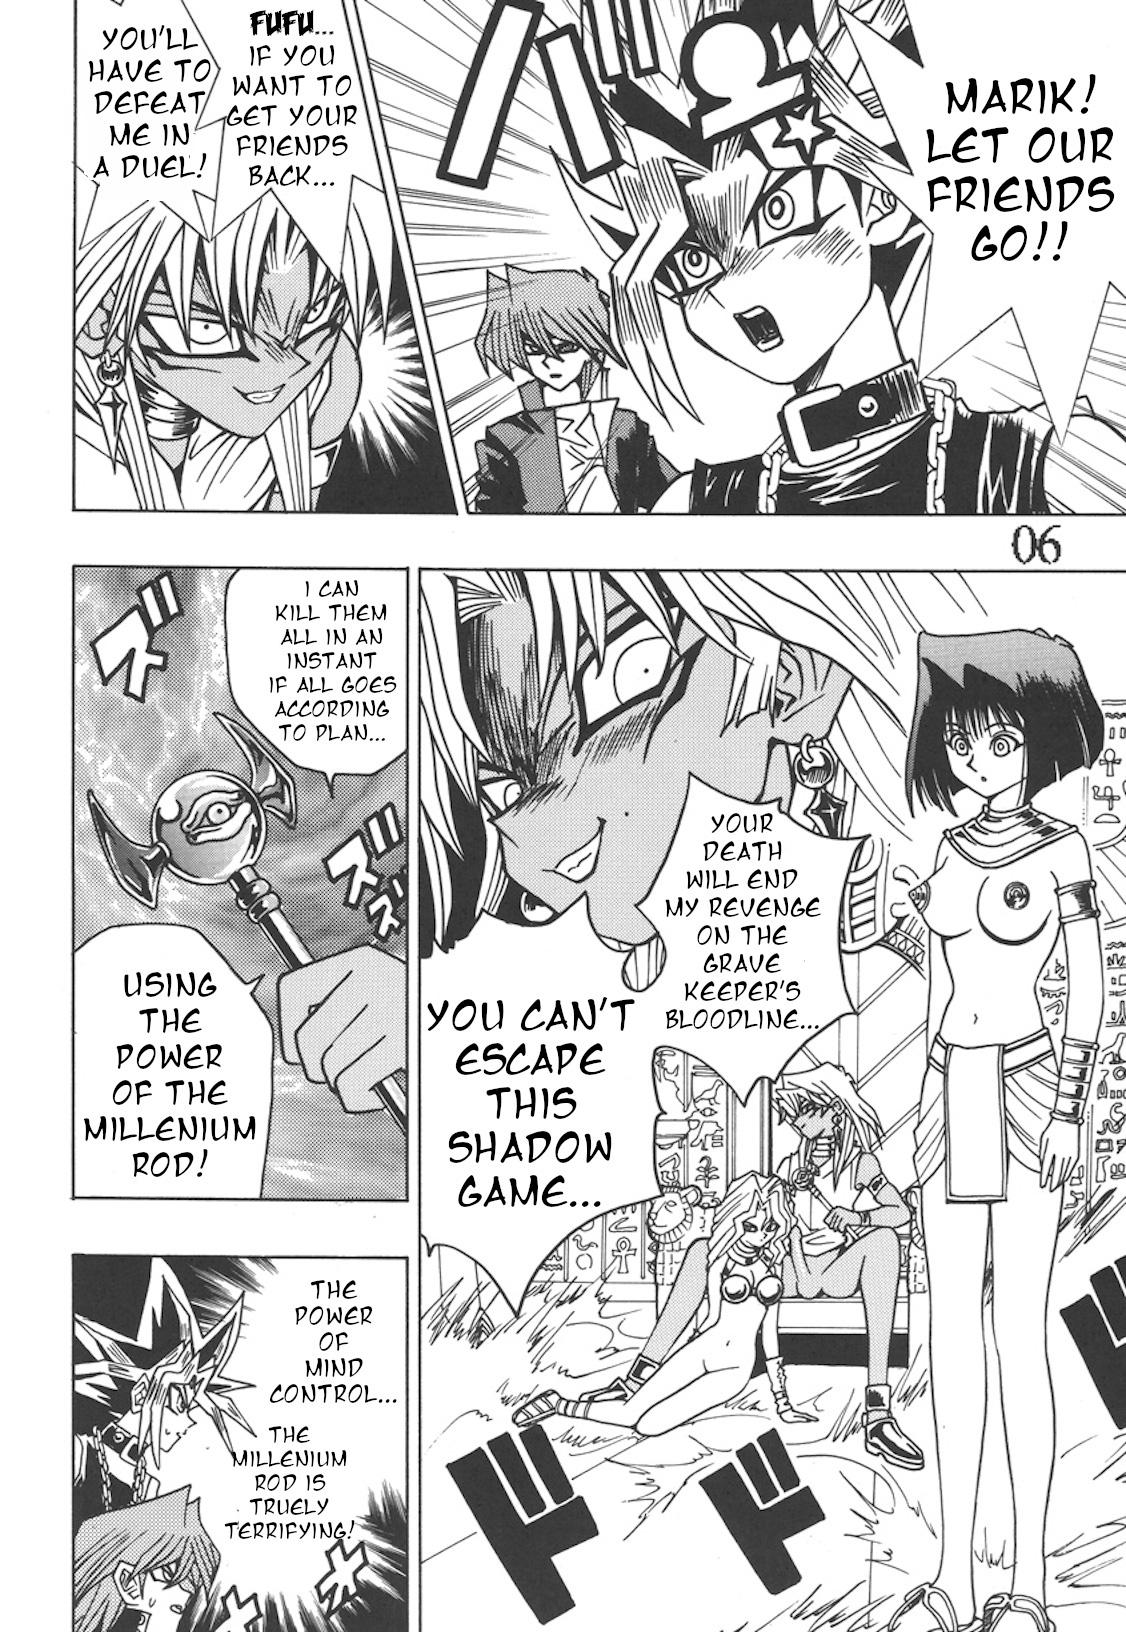 Exhibition Seinen Miracle JUMP - Yu-gi-oh Free Blowjob - Page 3